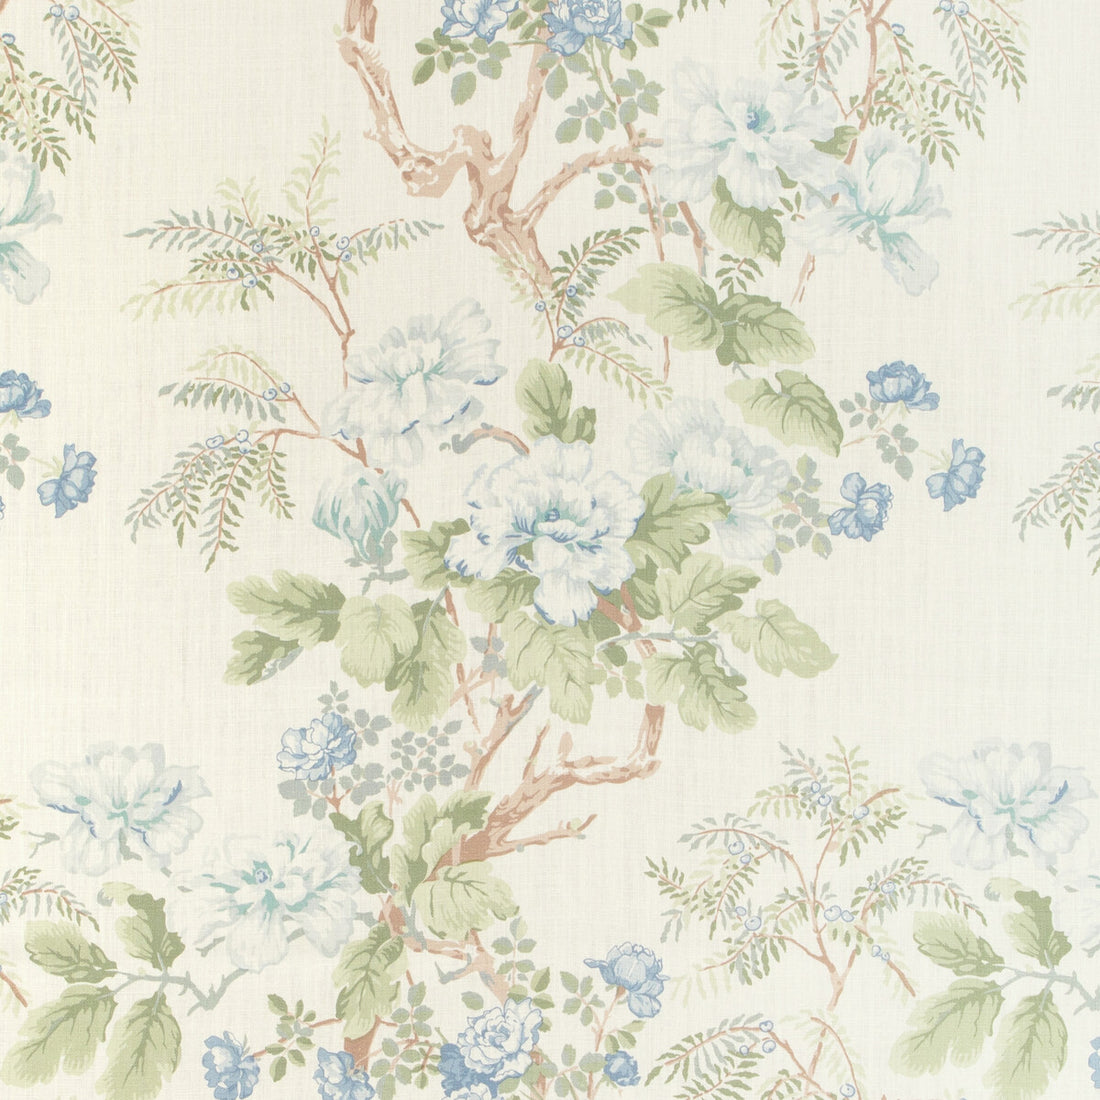 Chinese Peony fabric in blue color - pattern 2009164.153.0 - by Lee Jofa in the Lee Jofa 200 collection